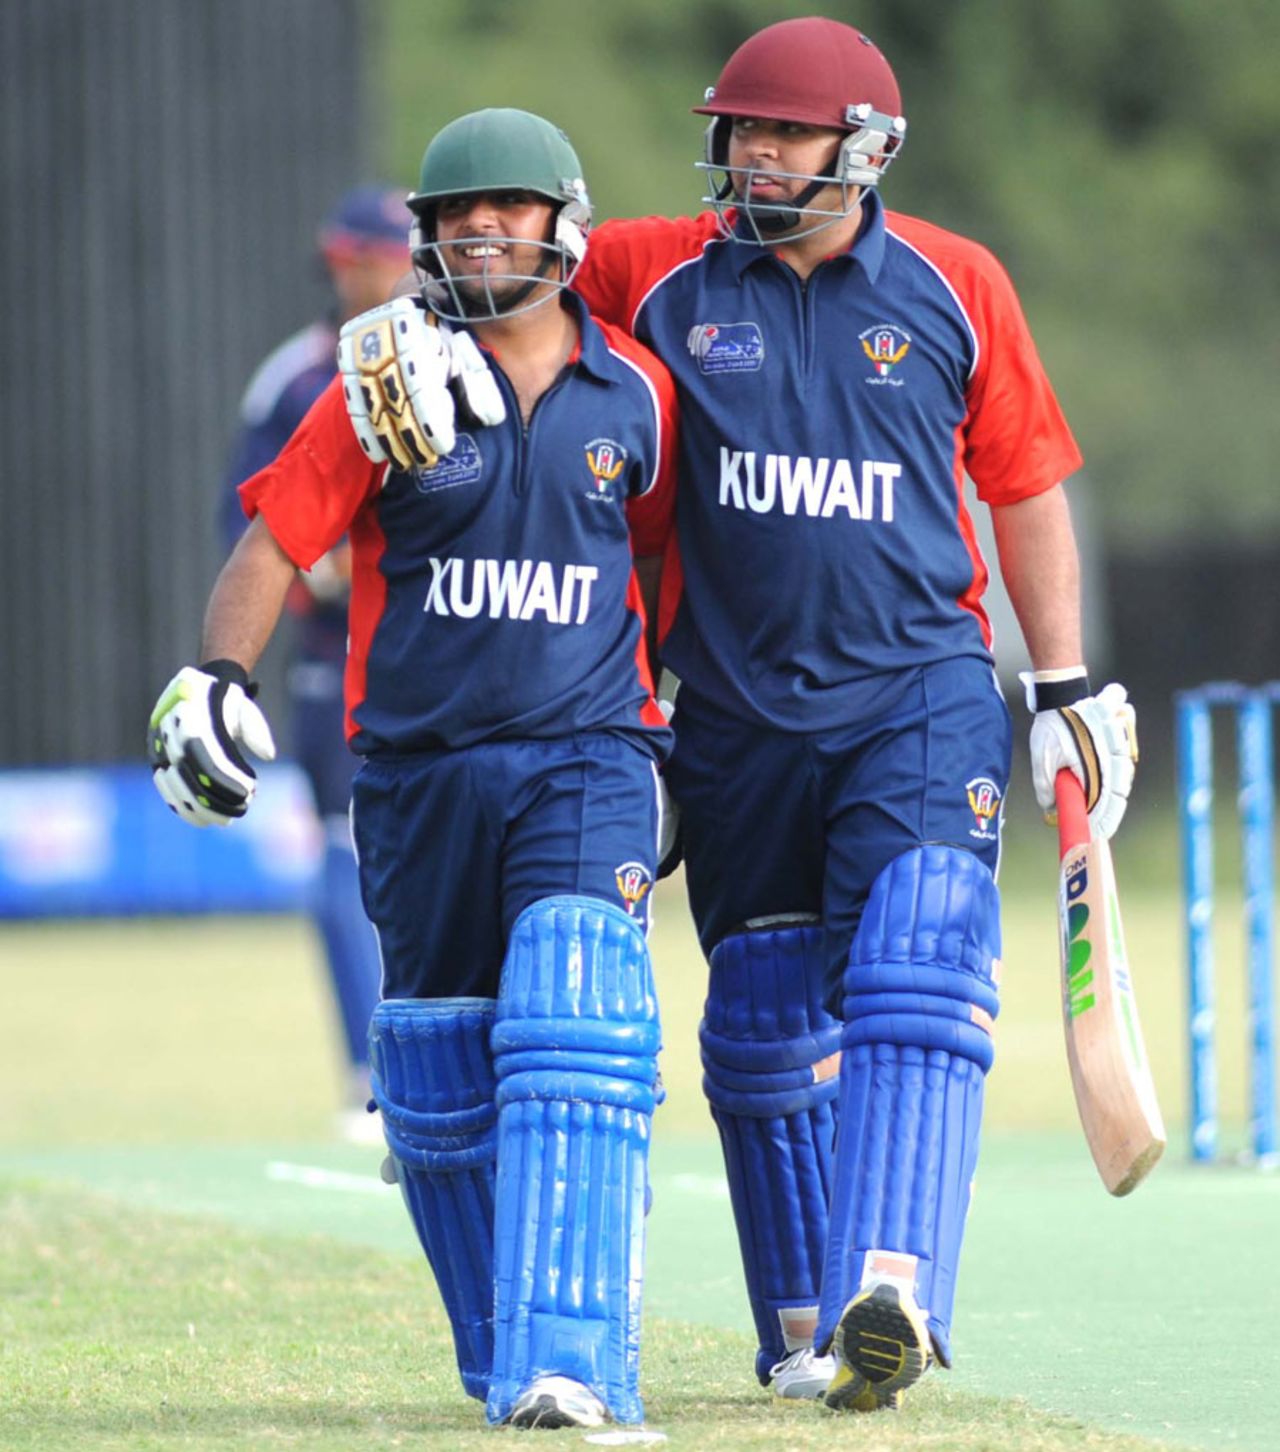 Sibtain Raza and Hisham Mirza after their match-winning stand, Norway v Kuwait, ICC World Cricket League Division Seven, Gaborone, Botswana, May 2, 2011 